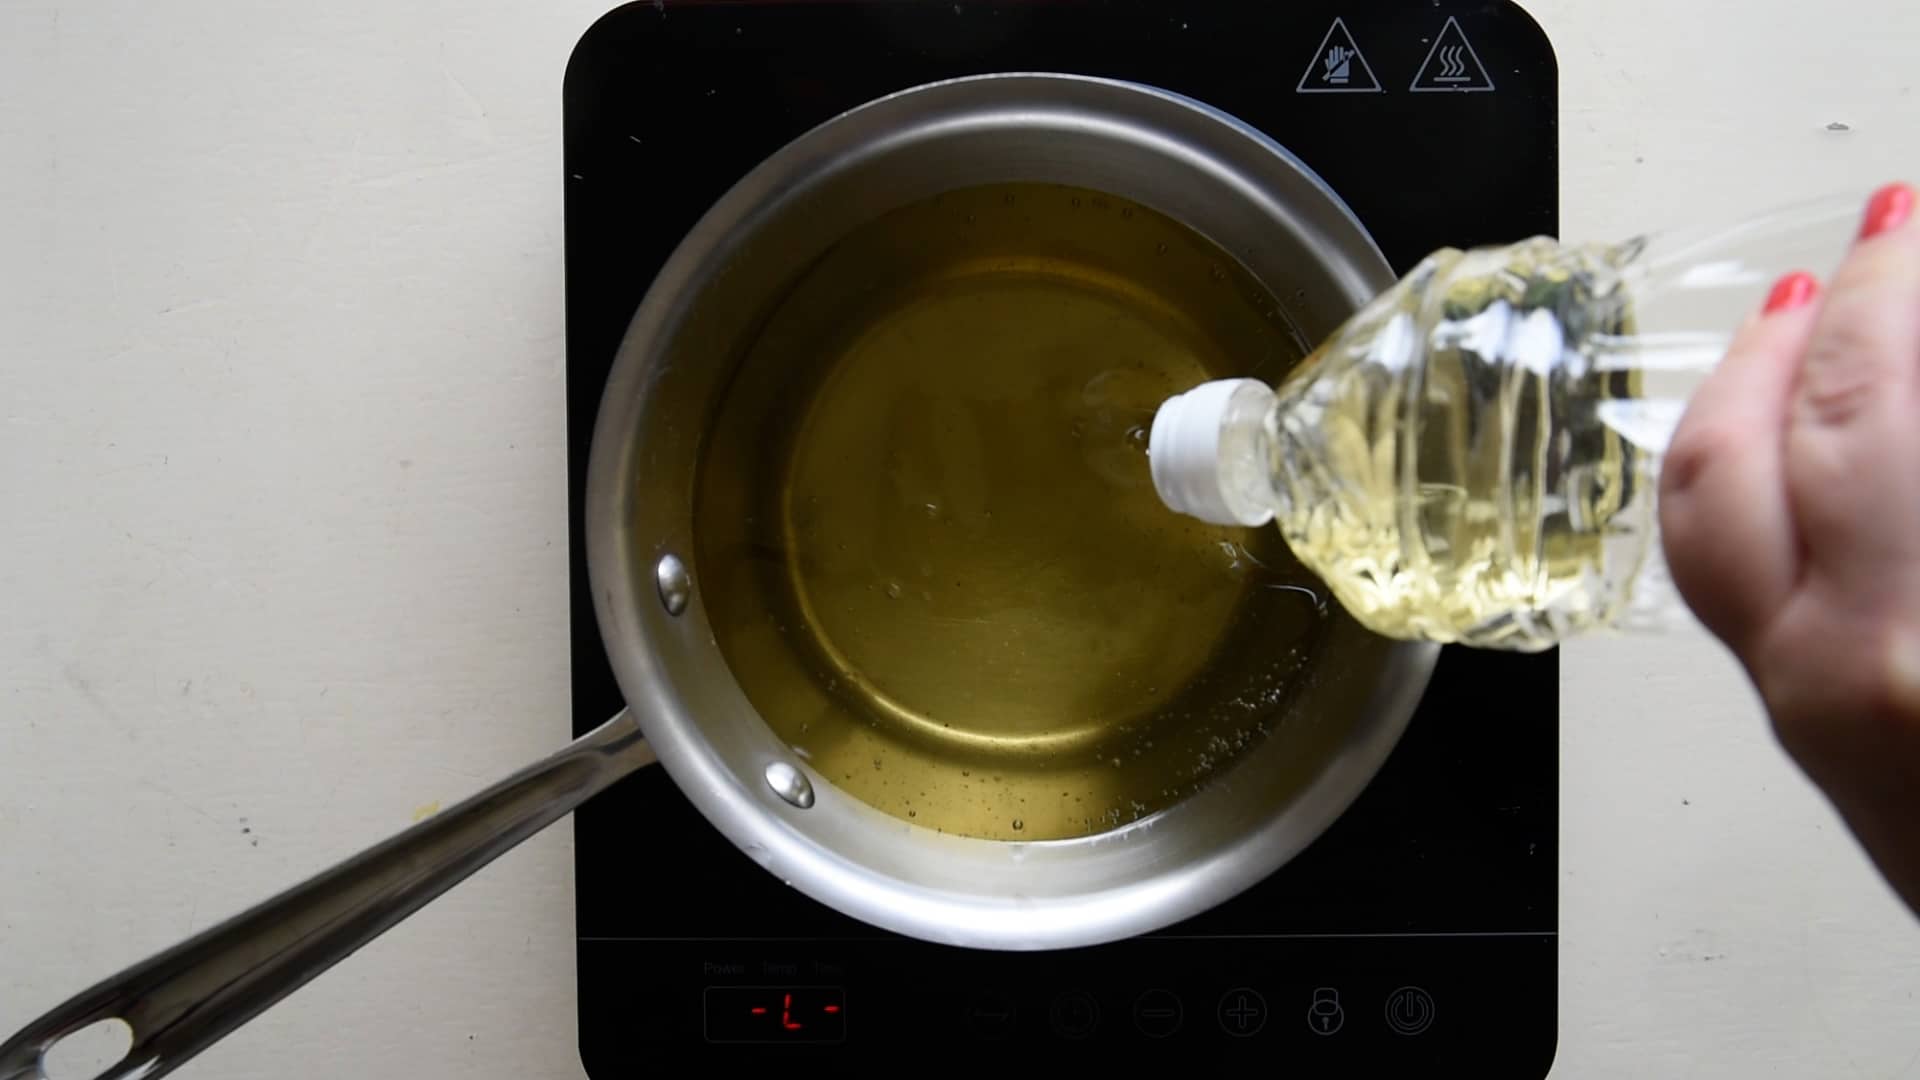 Place the frying oil in a pan